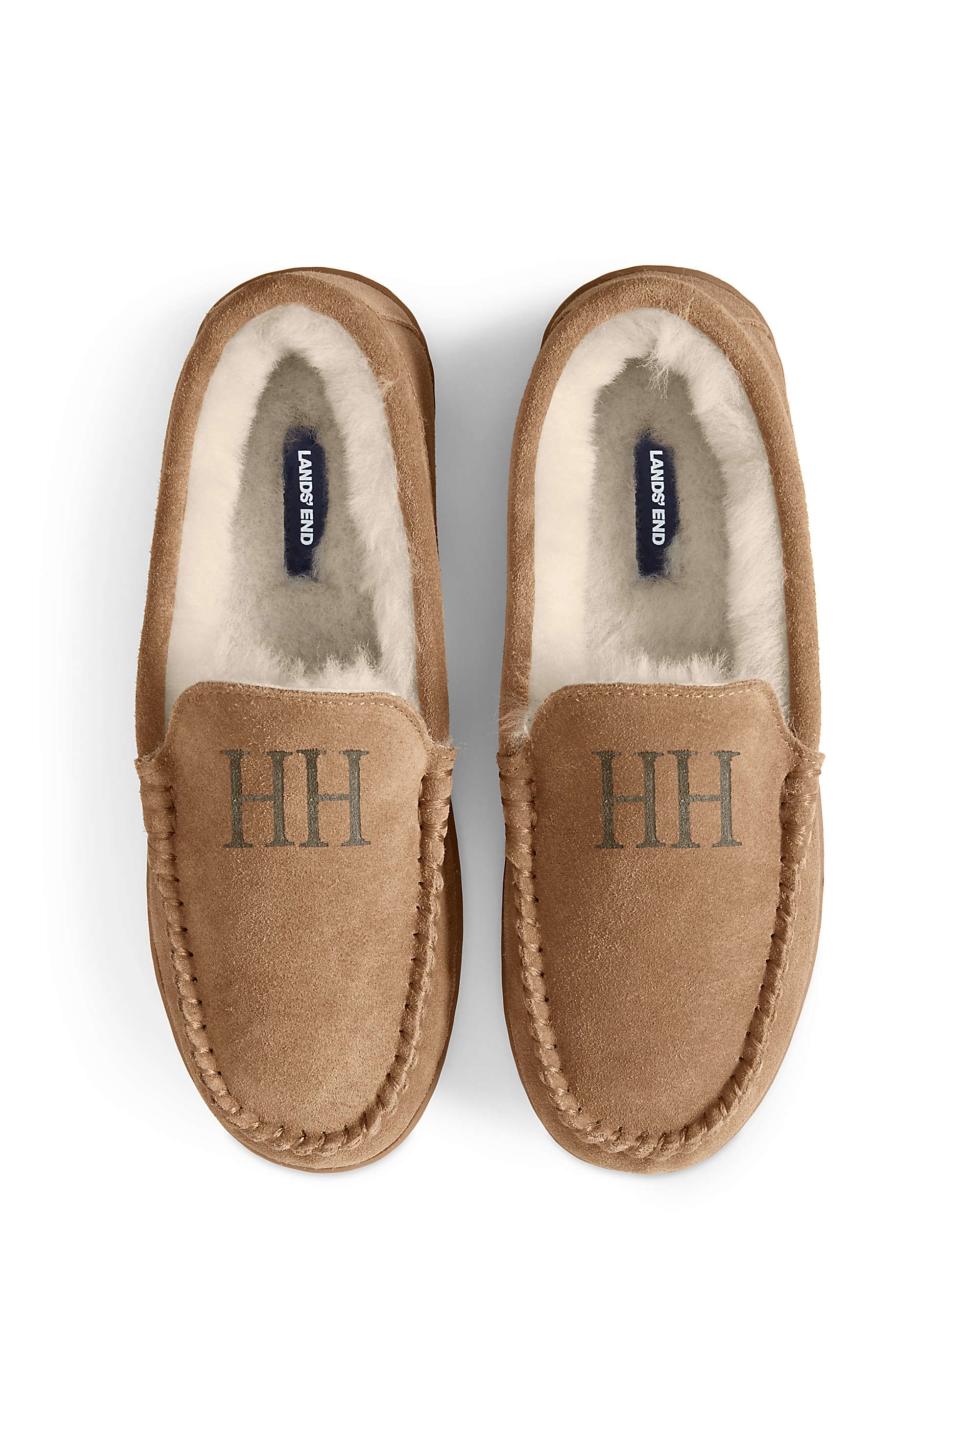 Men's Suede Leather Shearling Fur Moccasin Slippers